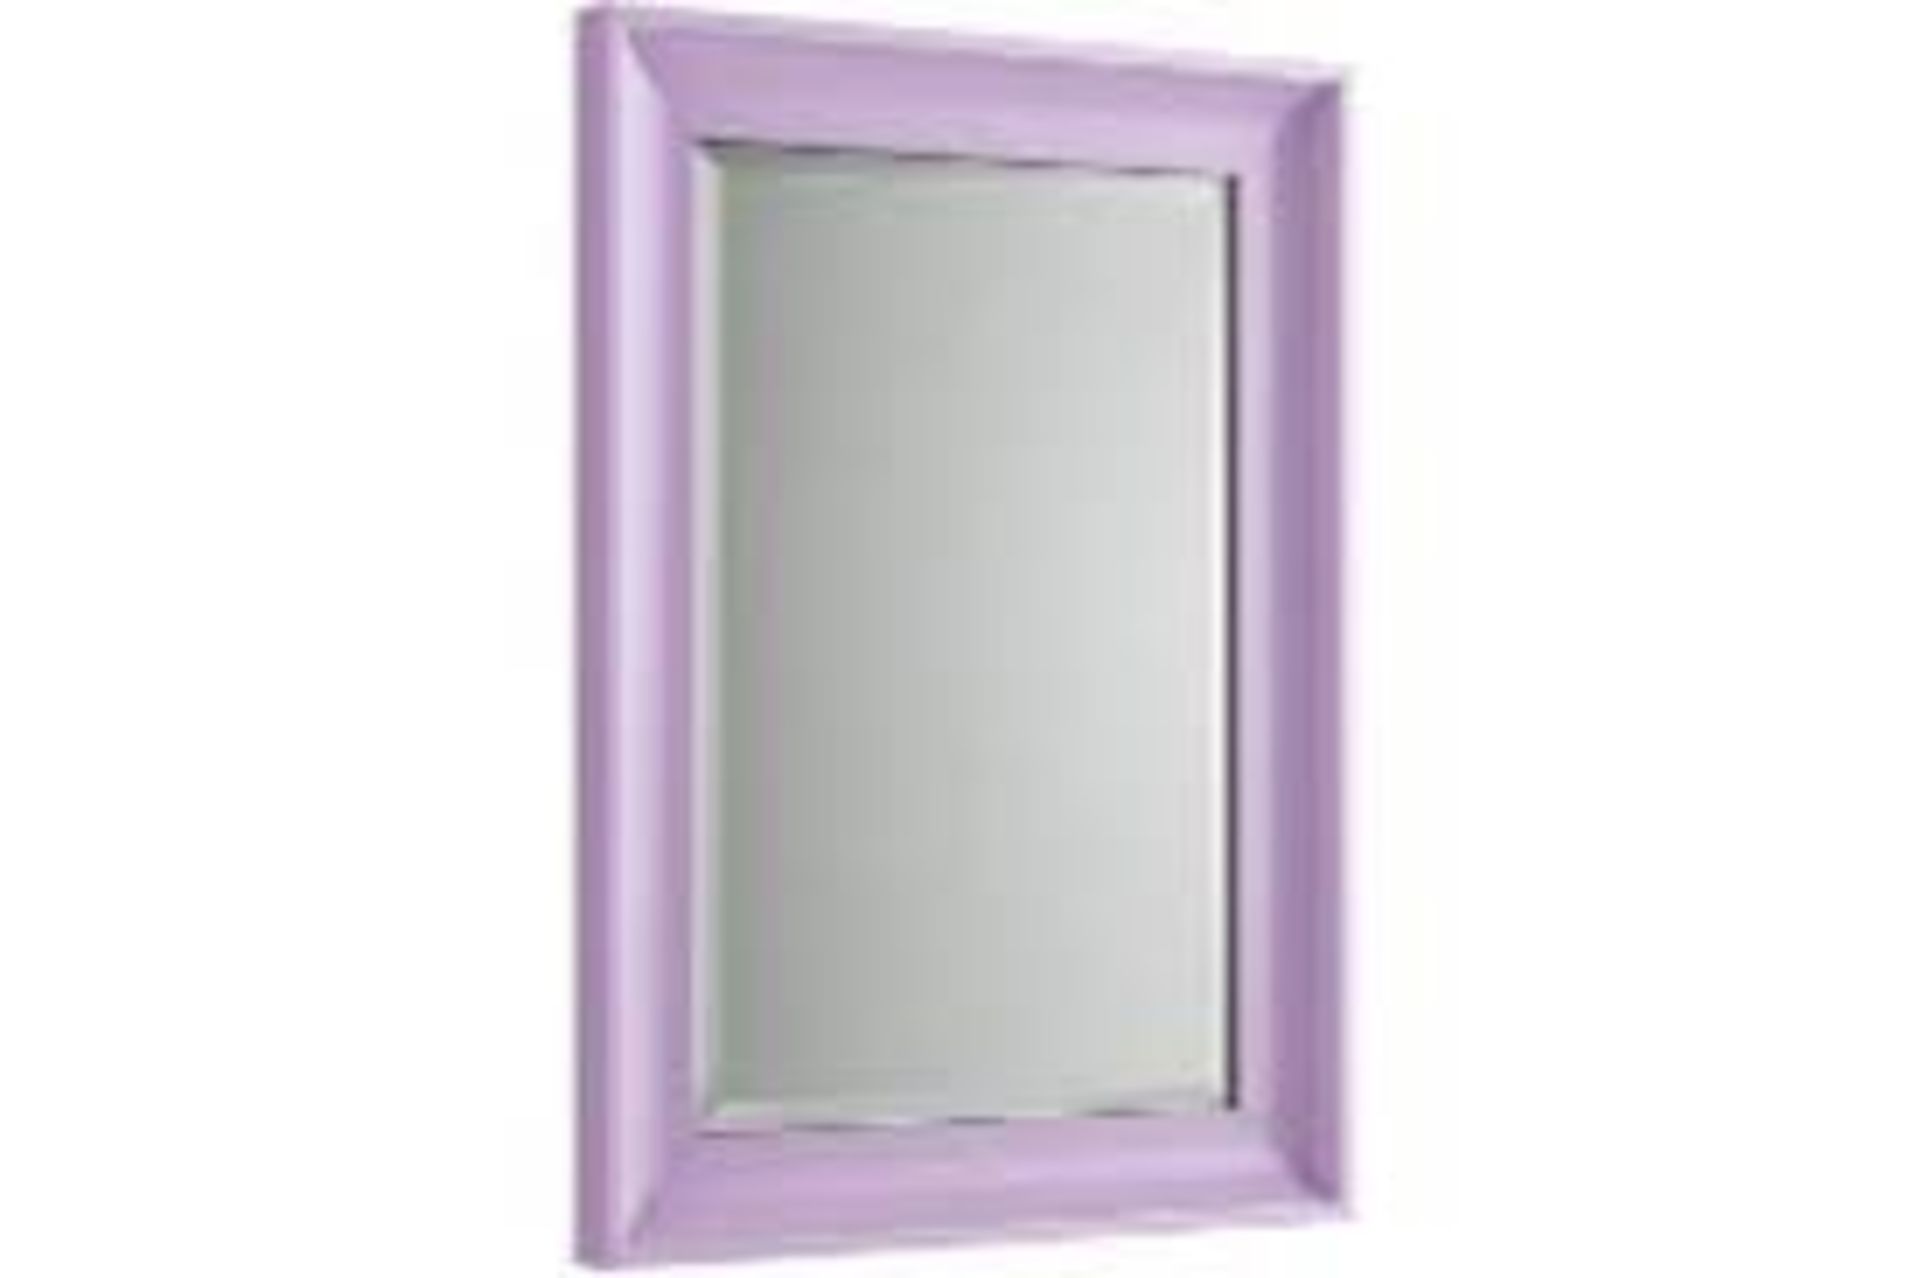 2 X NEW BOXED 700x500mm Melbourne Purple Framed Mirror. RRP £209.99 EACH .Ml8019 Adds A Funky,